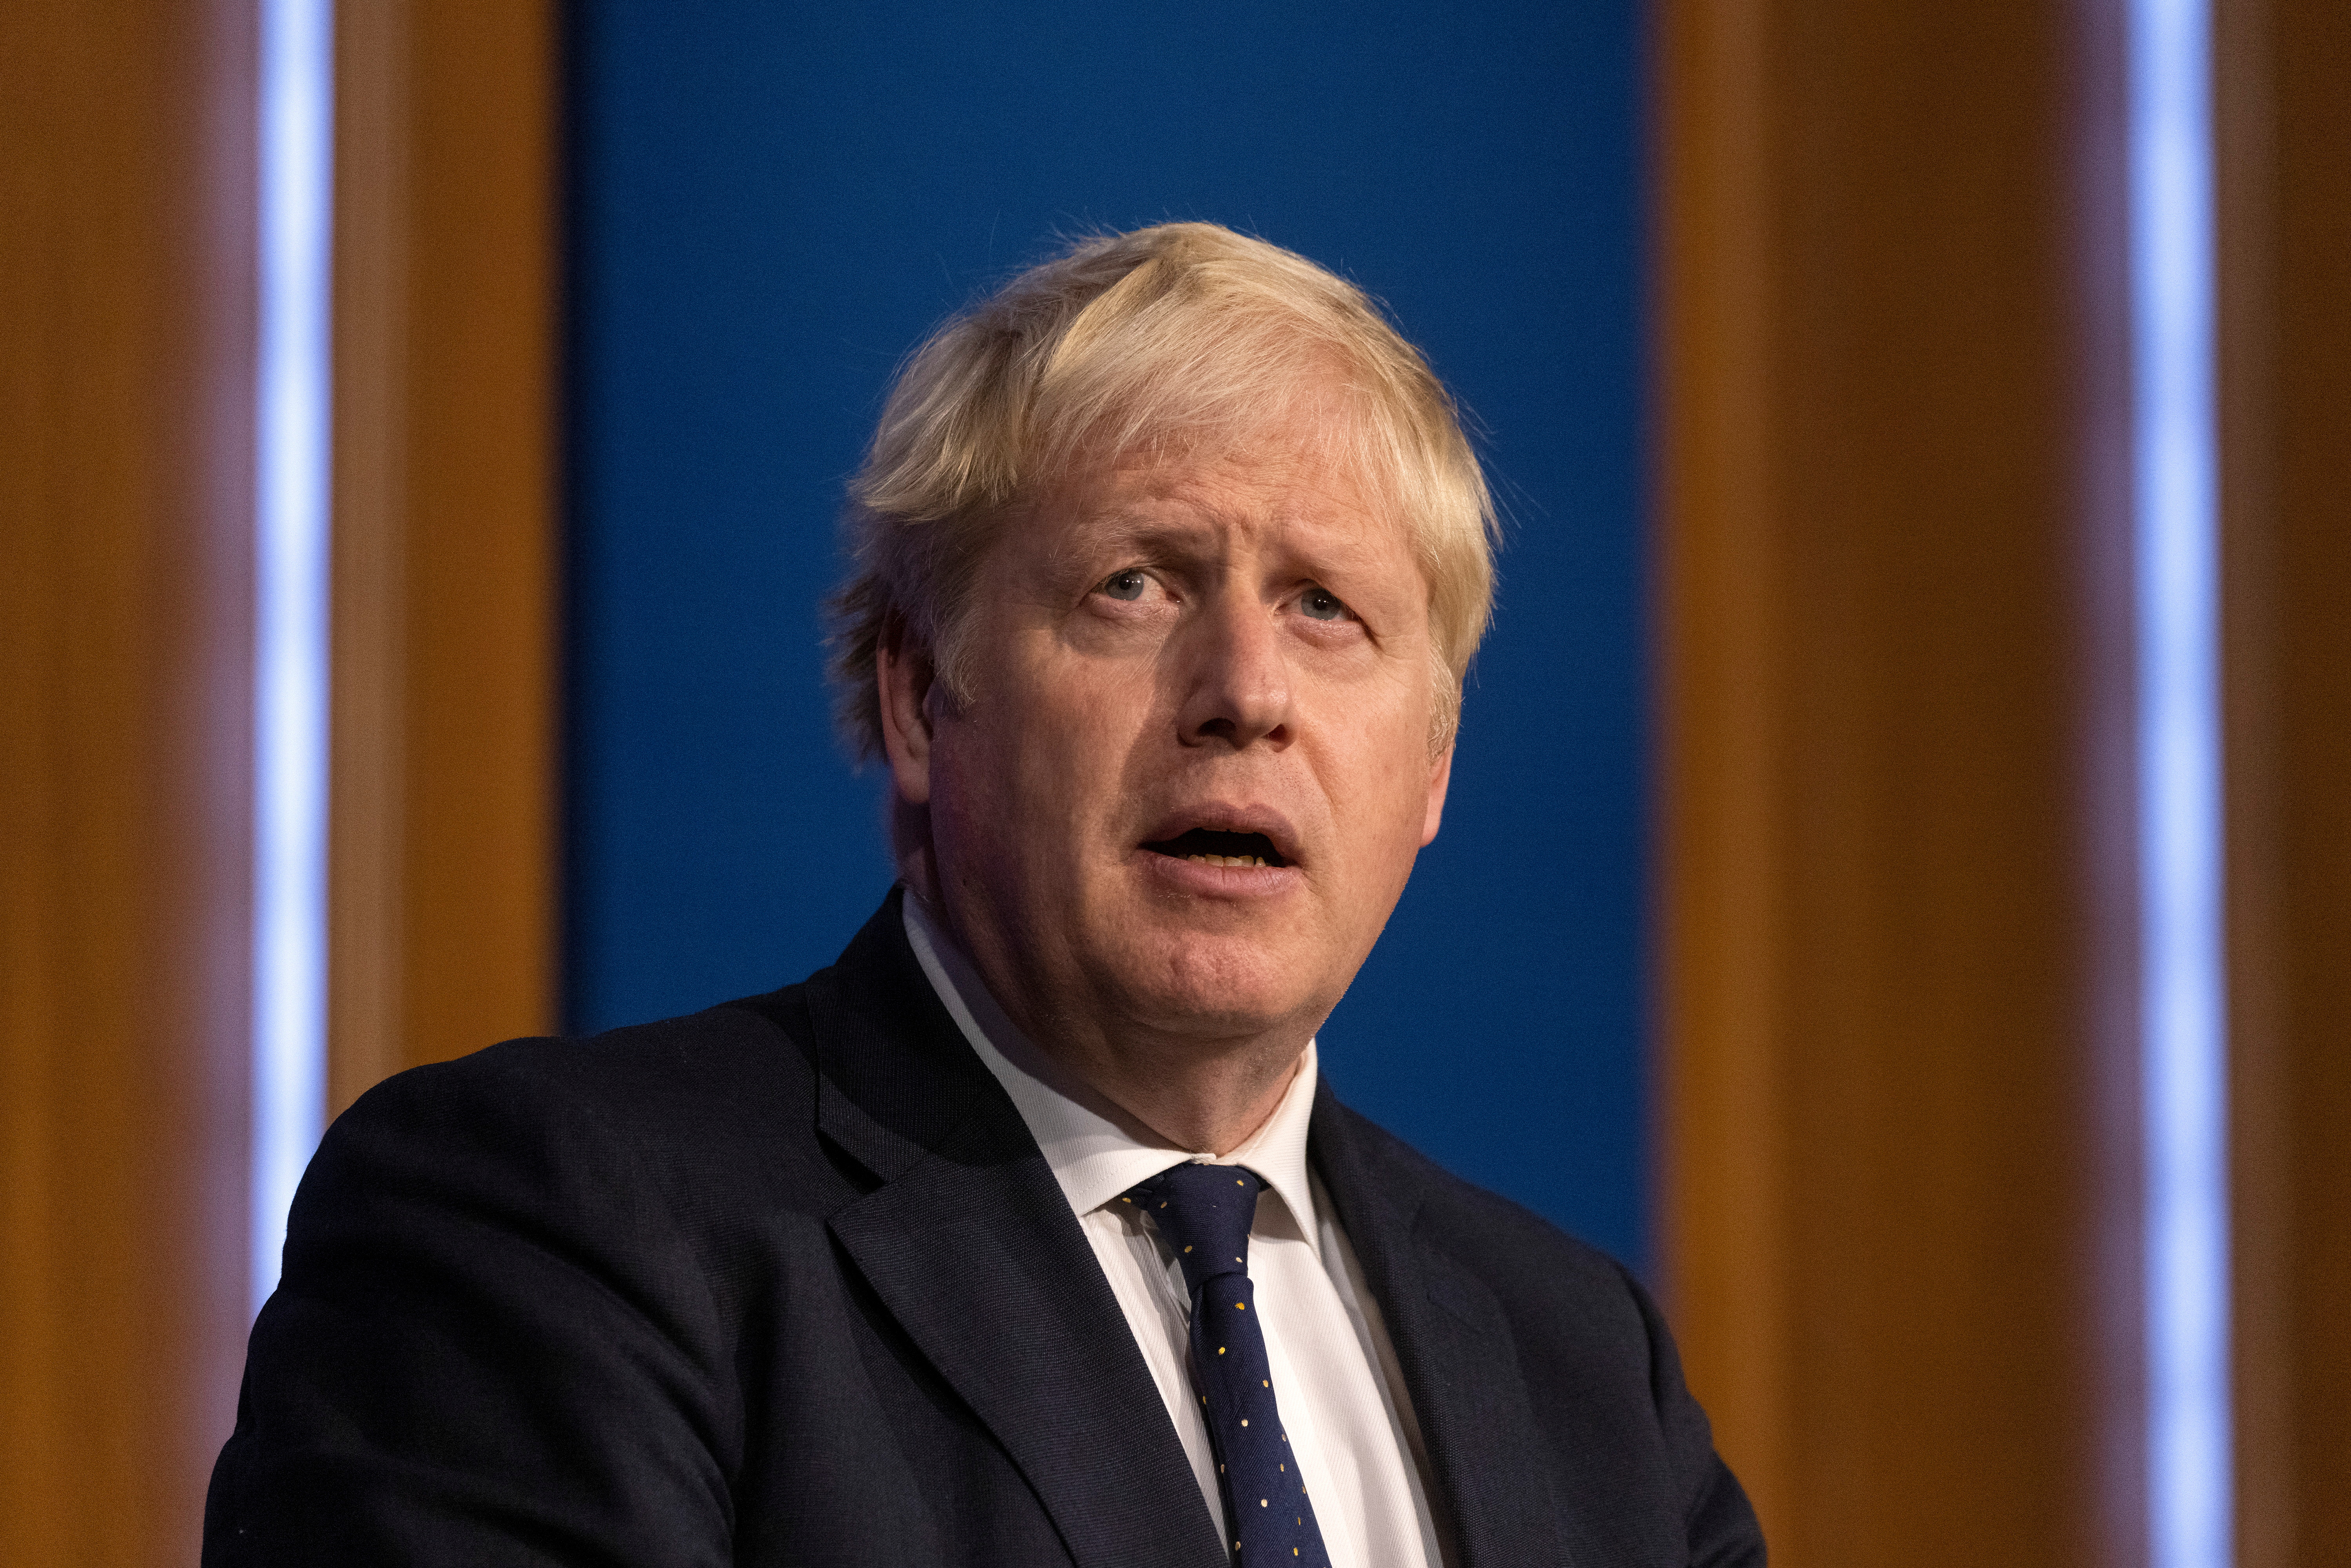 Britain's PM Johnson holds news conference on winter COVID-19 plan